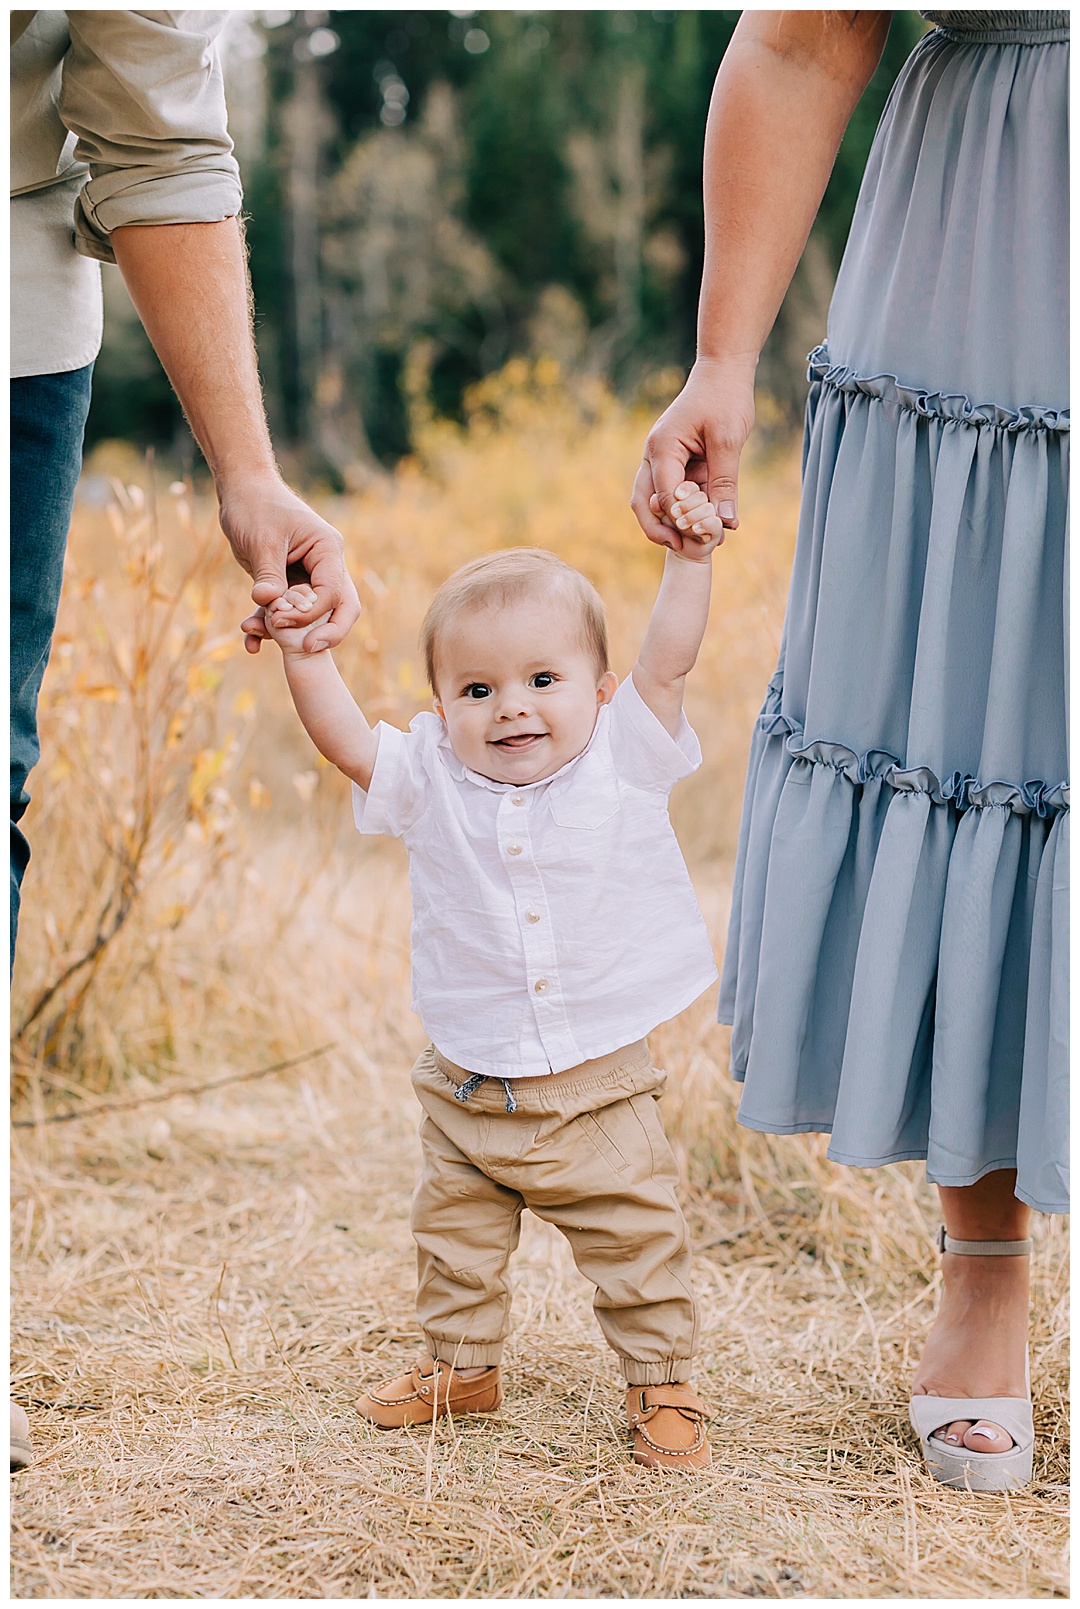 Jordan Pines Fall Family Pictures | Rogers Family